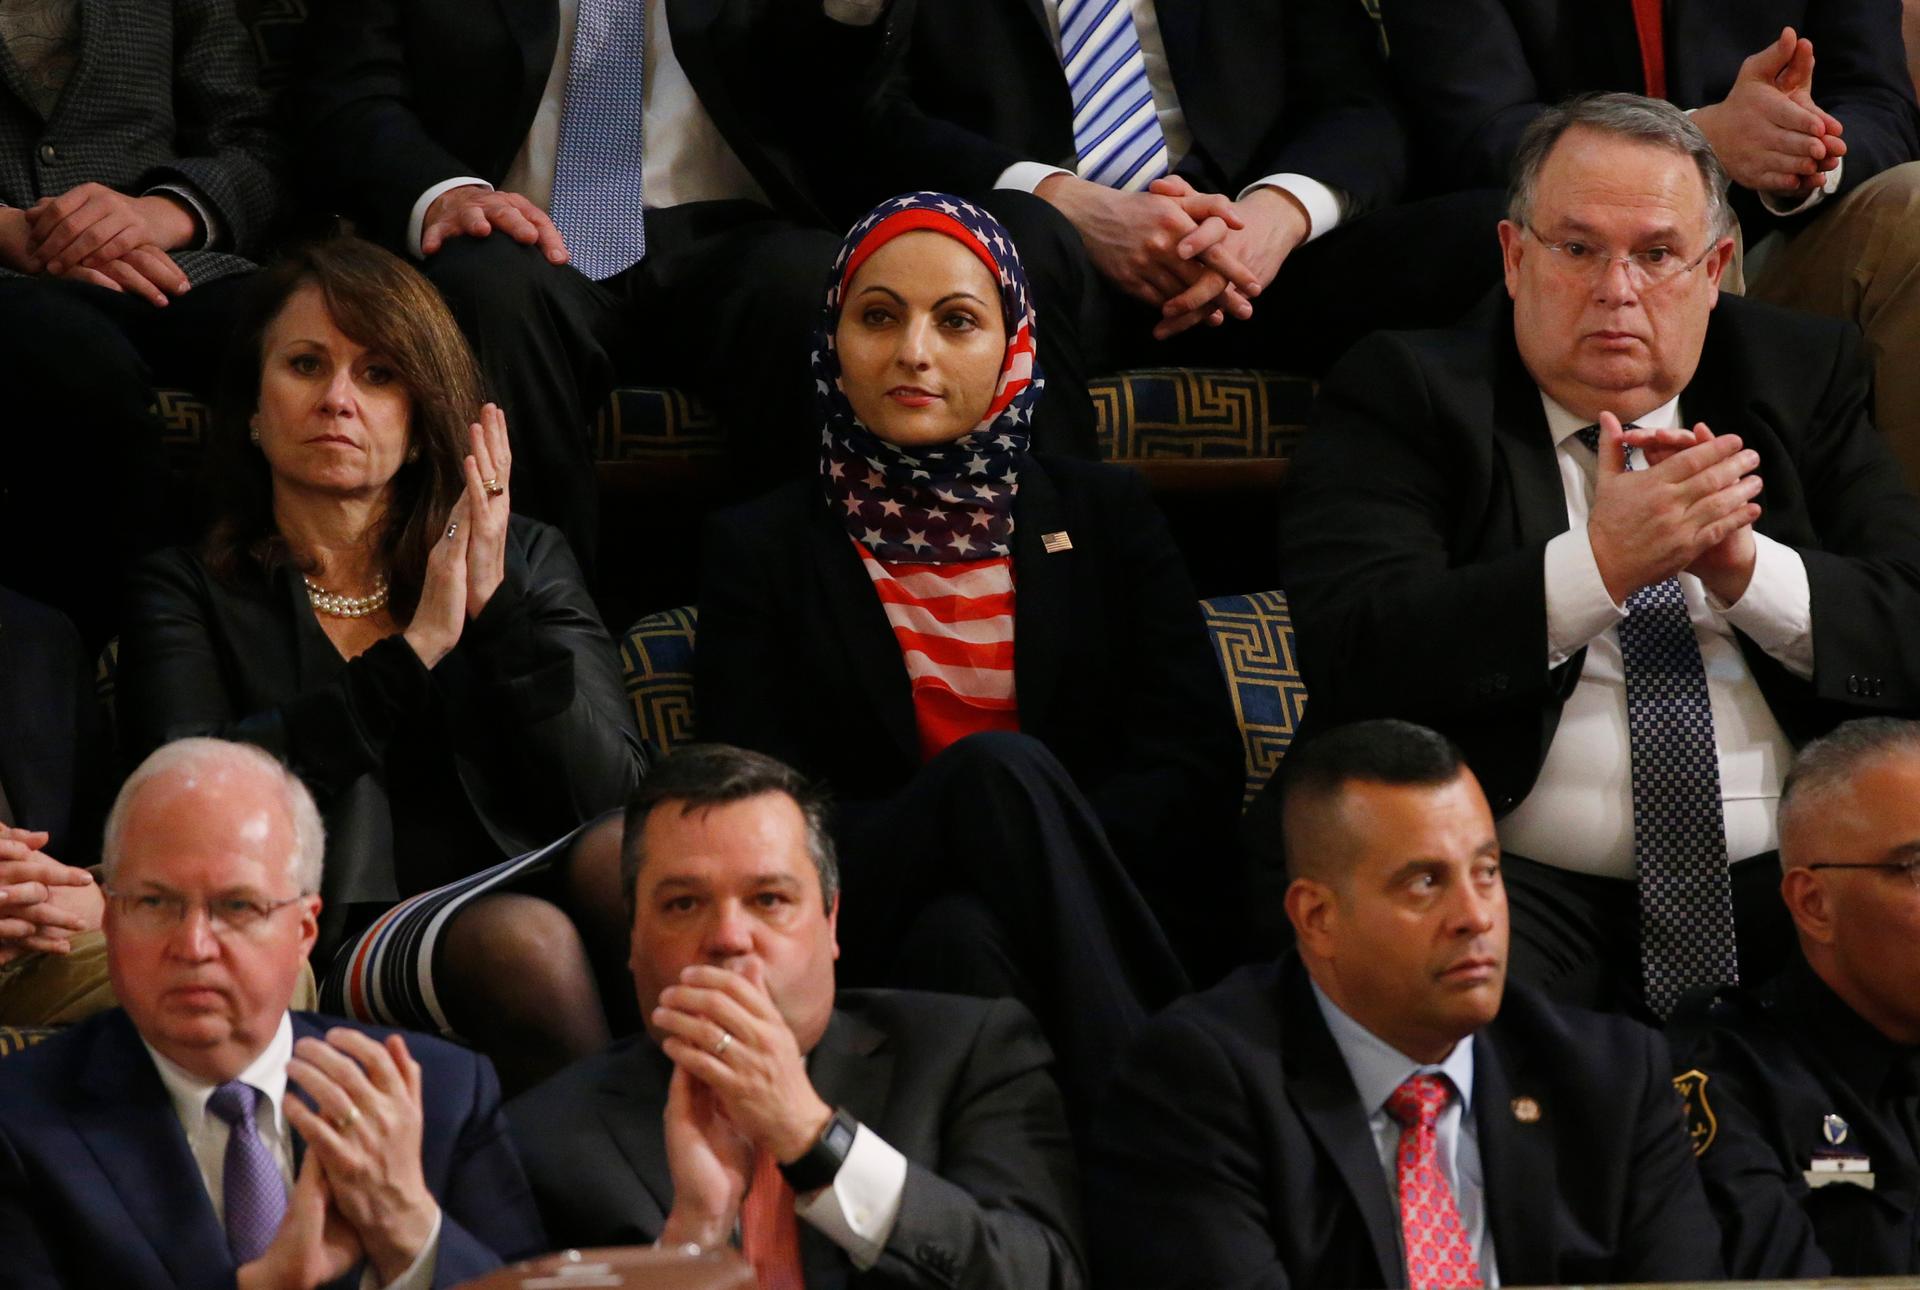 Woman in hijab with American flag pattern amongst men in suits and one woman in black shirt